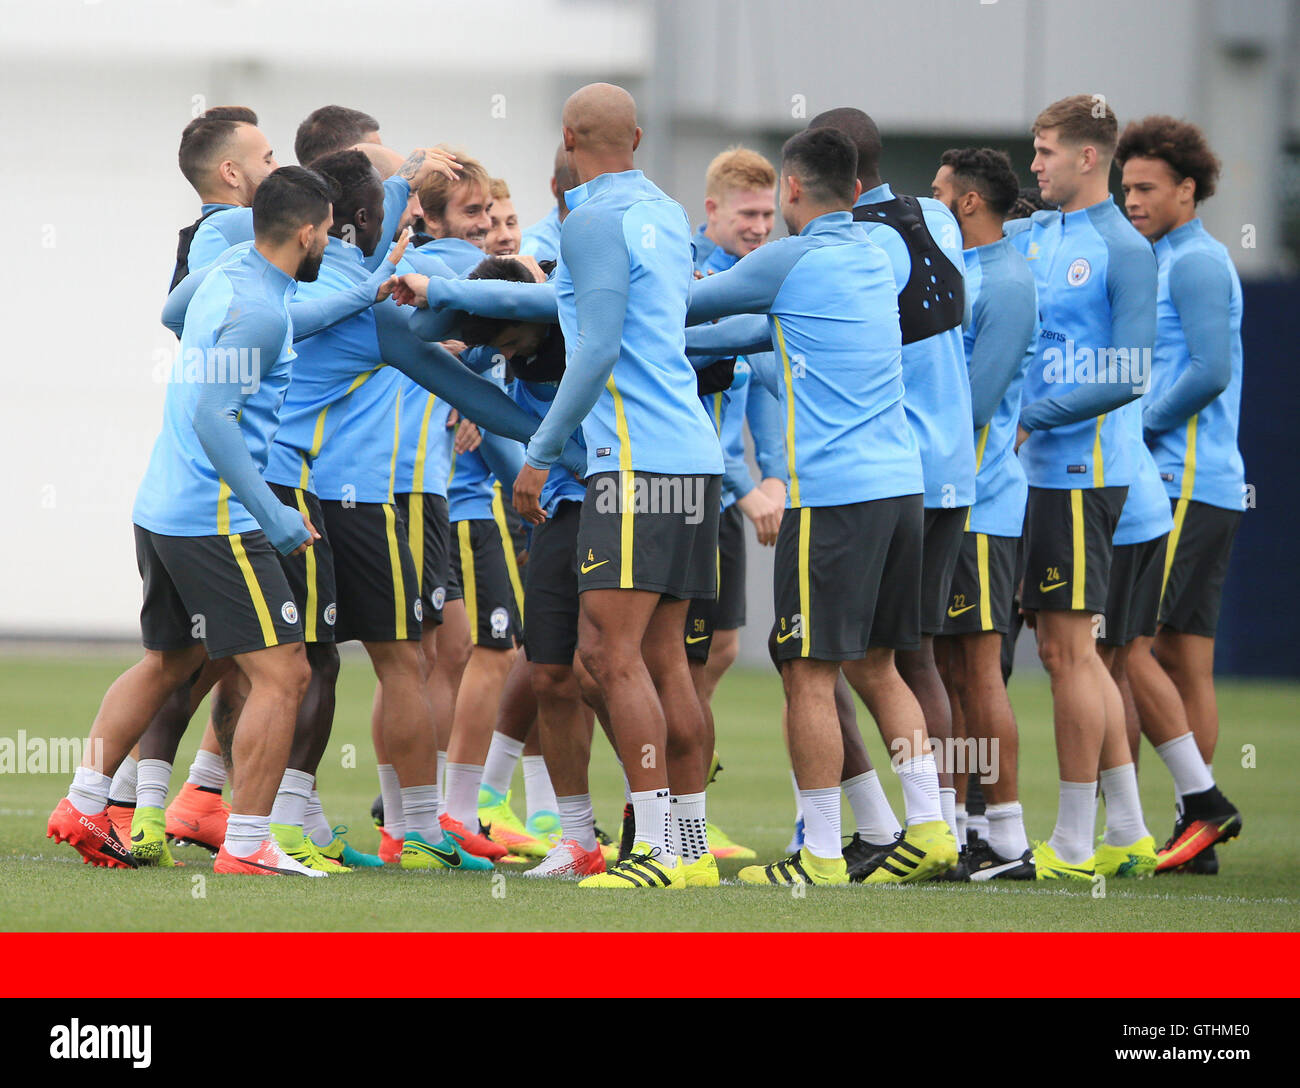 Manchester City FC via Press Association Images MINIMUM FEE 40GBP PER IMAGE - CONTACT PRESS ASSOCIATION IMAGES FOR FURTHER INFORMATION. Manchester City's squad in training Stock Photo